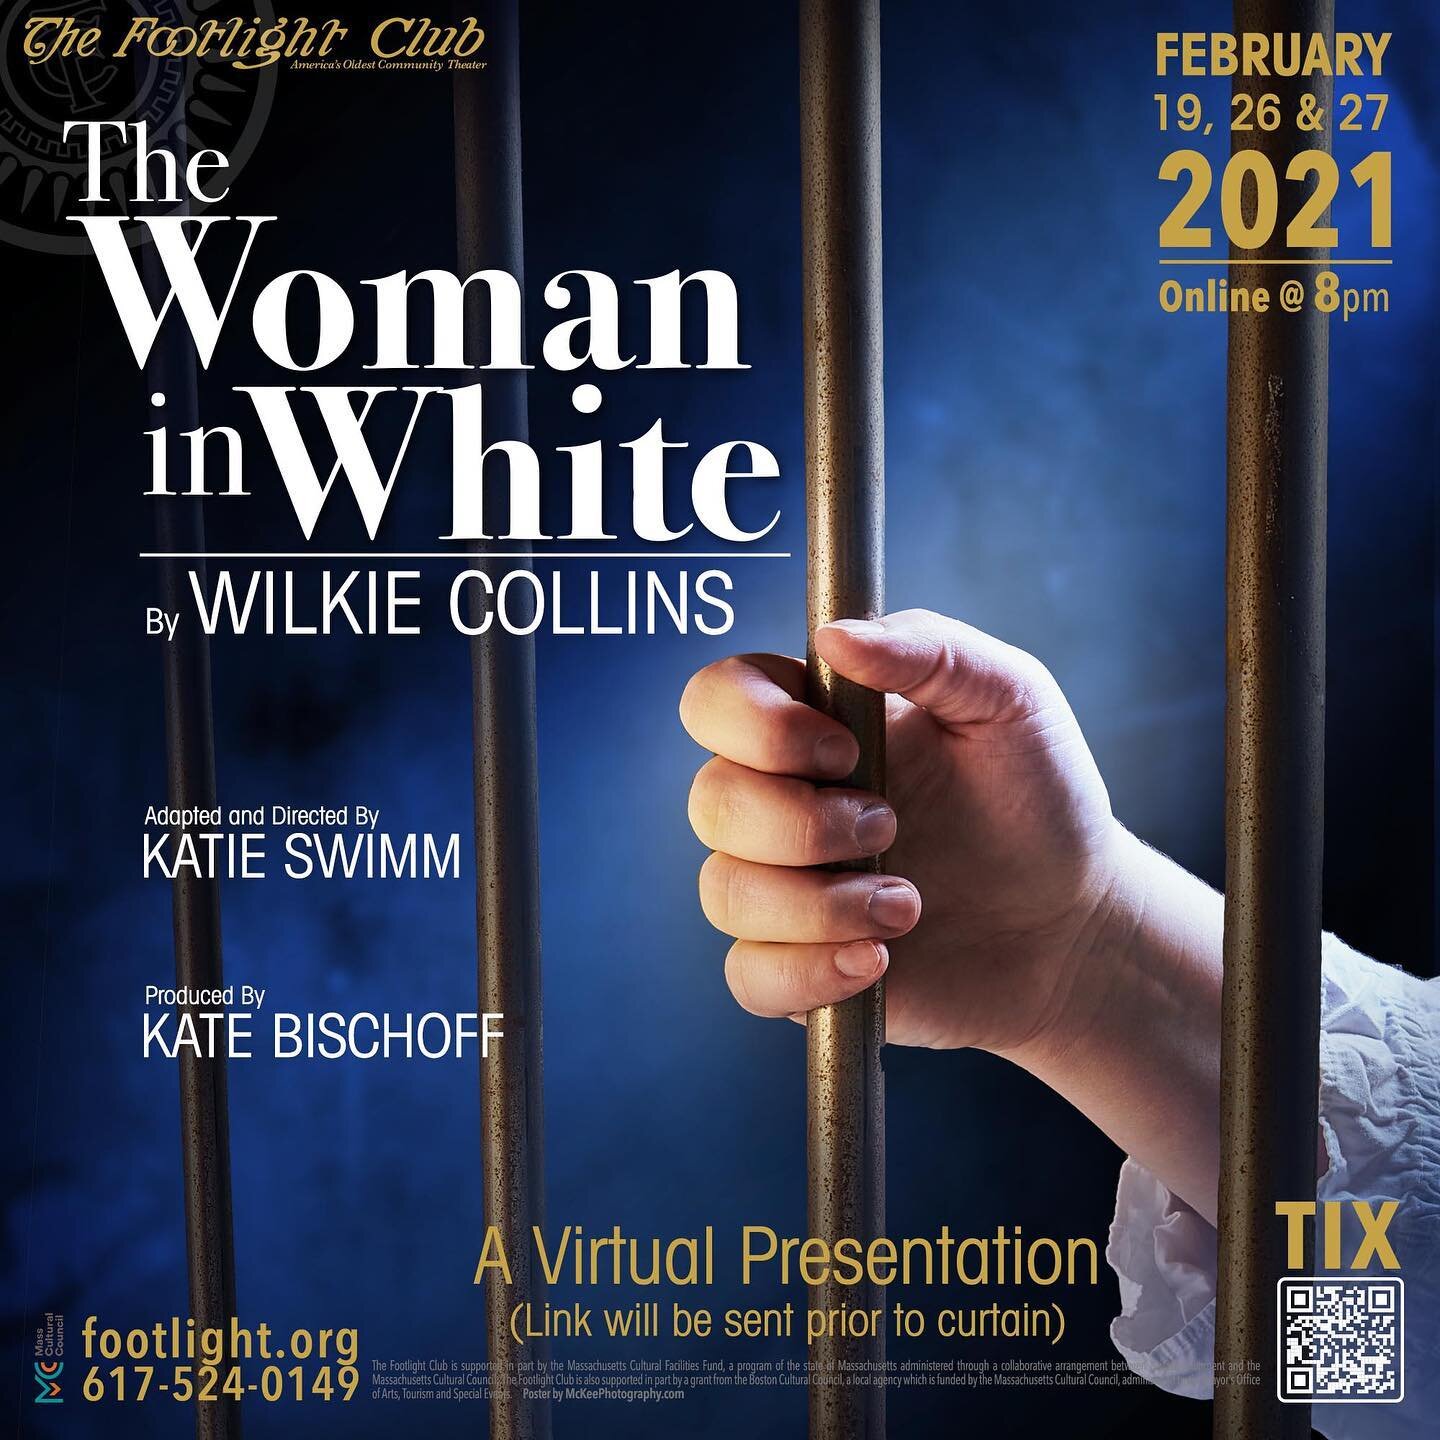 Tickets are now available for the first show of our 144th season, The Woman in White! ⁣
⁣
Tickets available here: https://www.showtix4u.com/event-details/46391